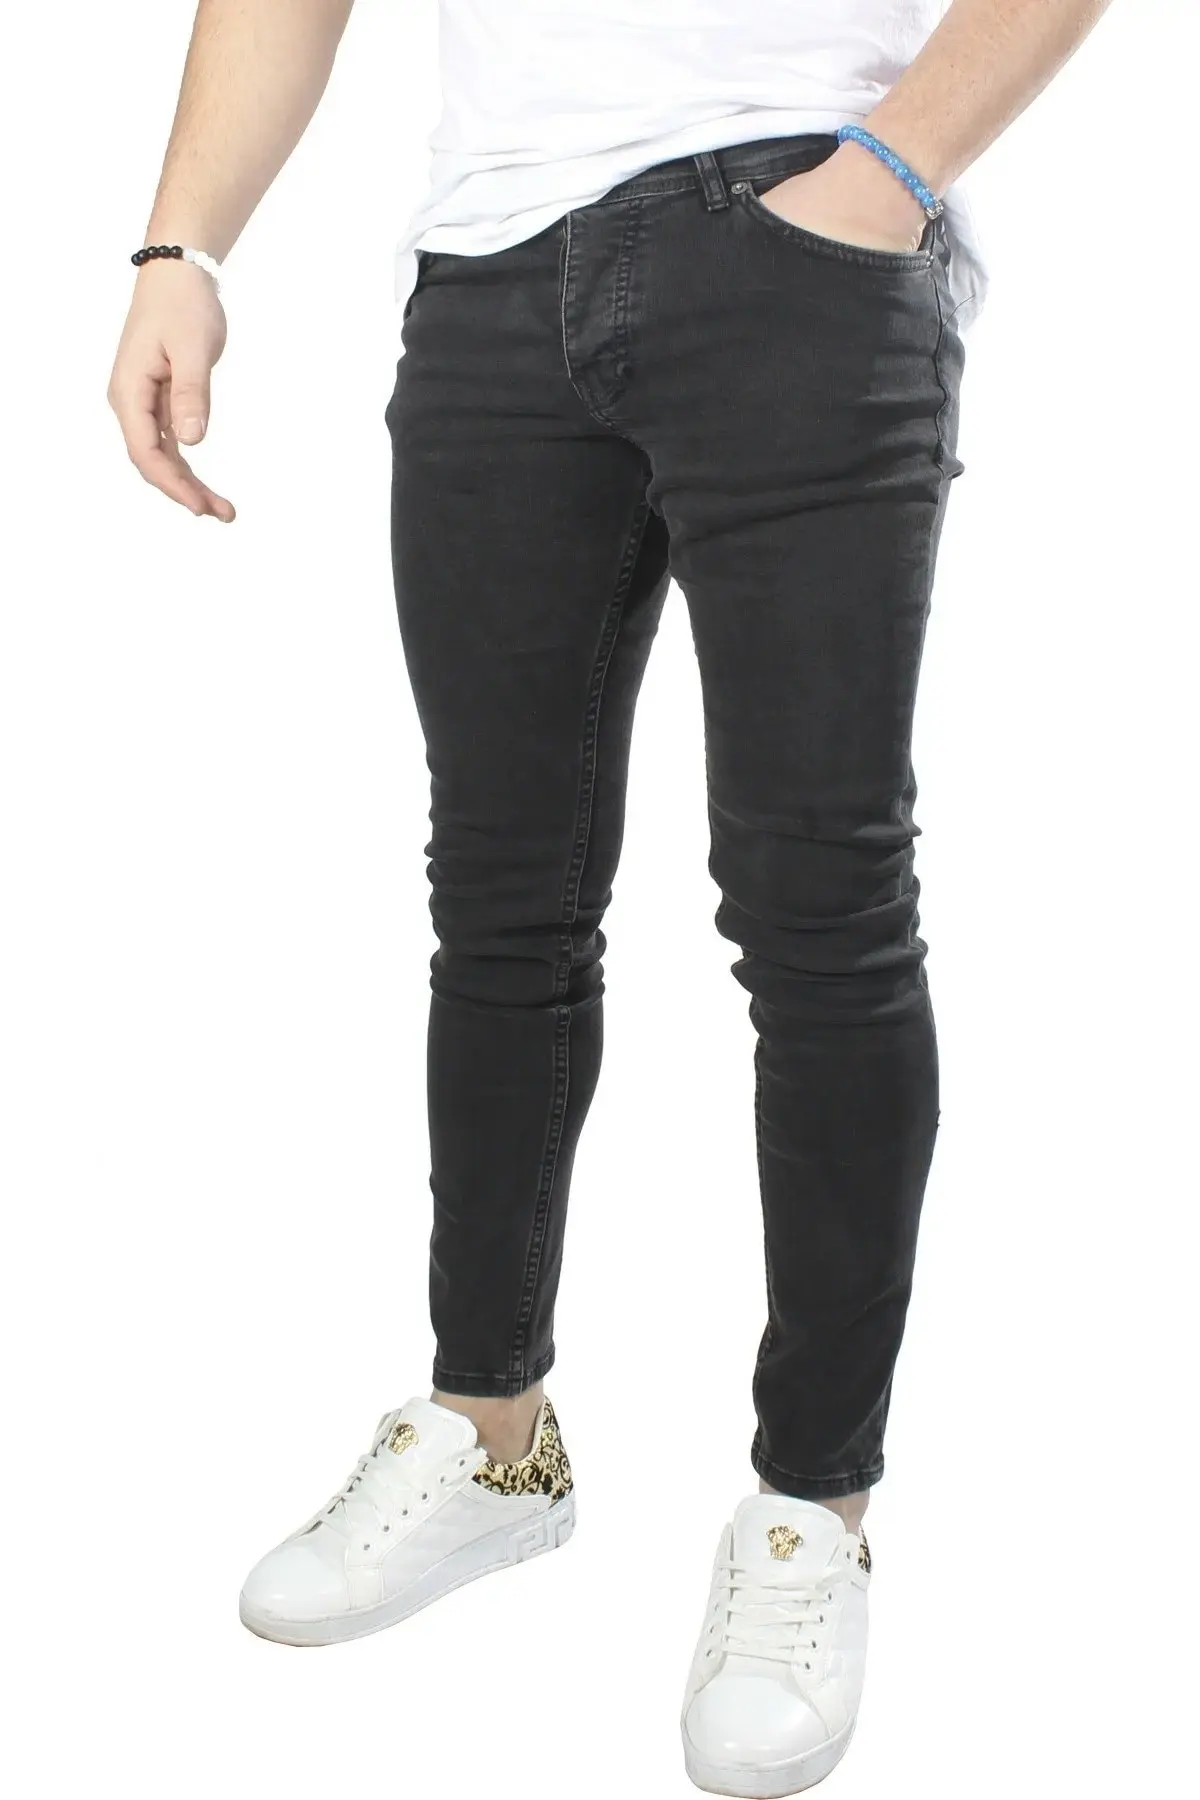 Men's Clothing Denim Pants For Man Trousers Men's Jeans Slim Fit Strech Flexible Fashion Tight-Fitting Stylish Casual